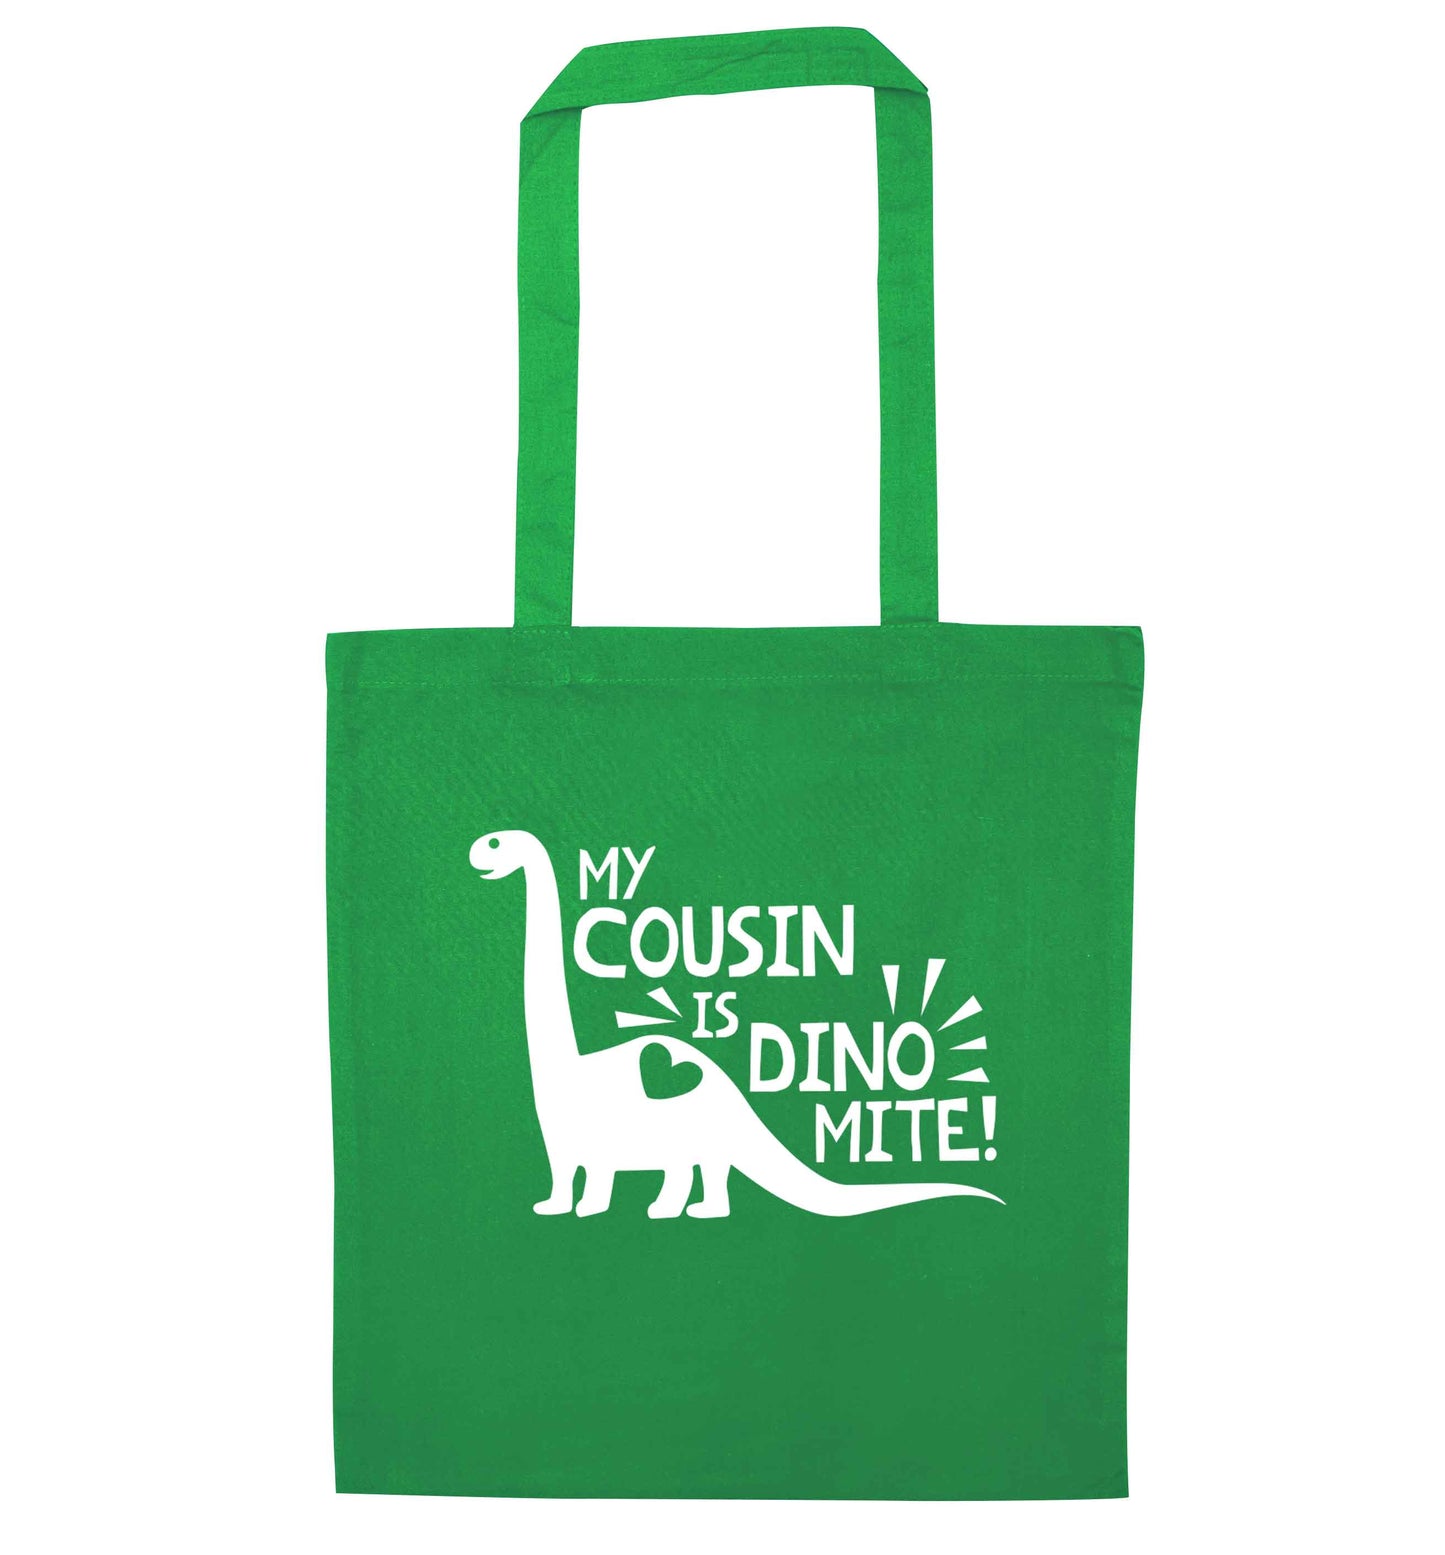 My cousin is dinomite! green tote bag